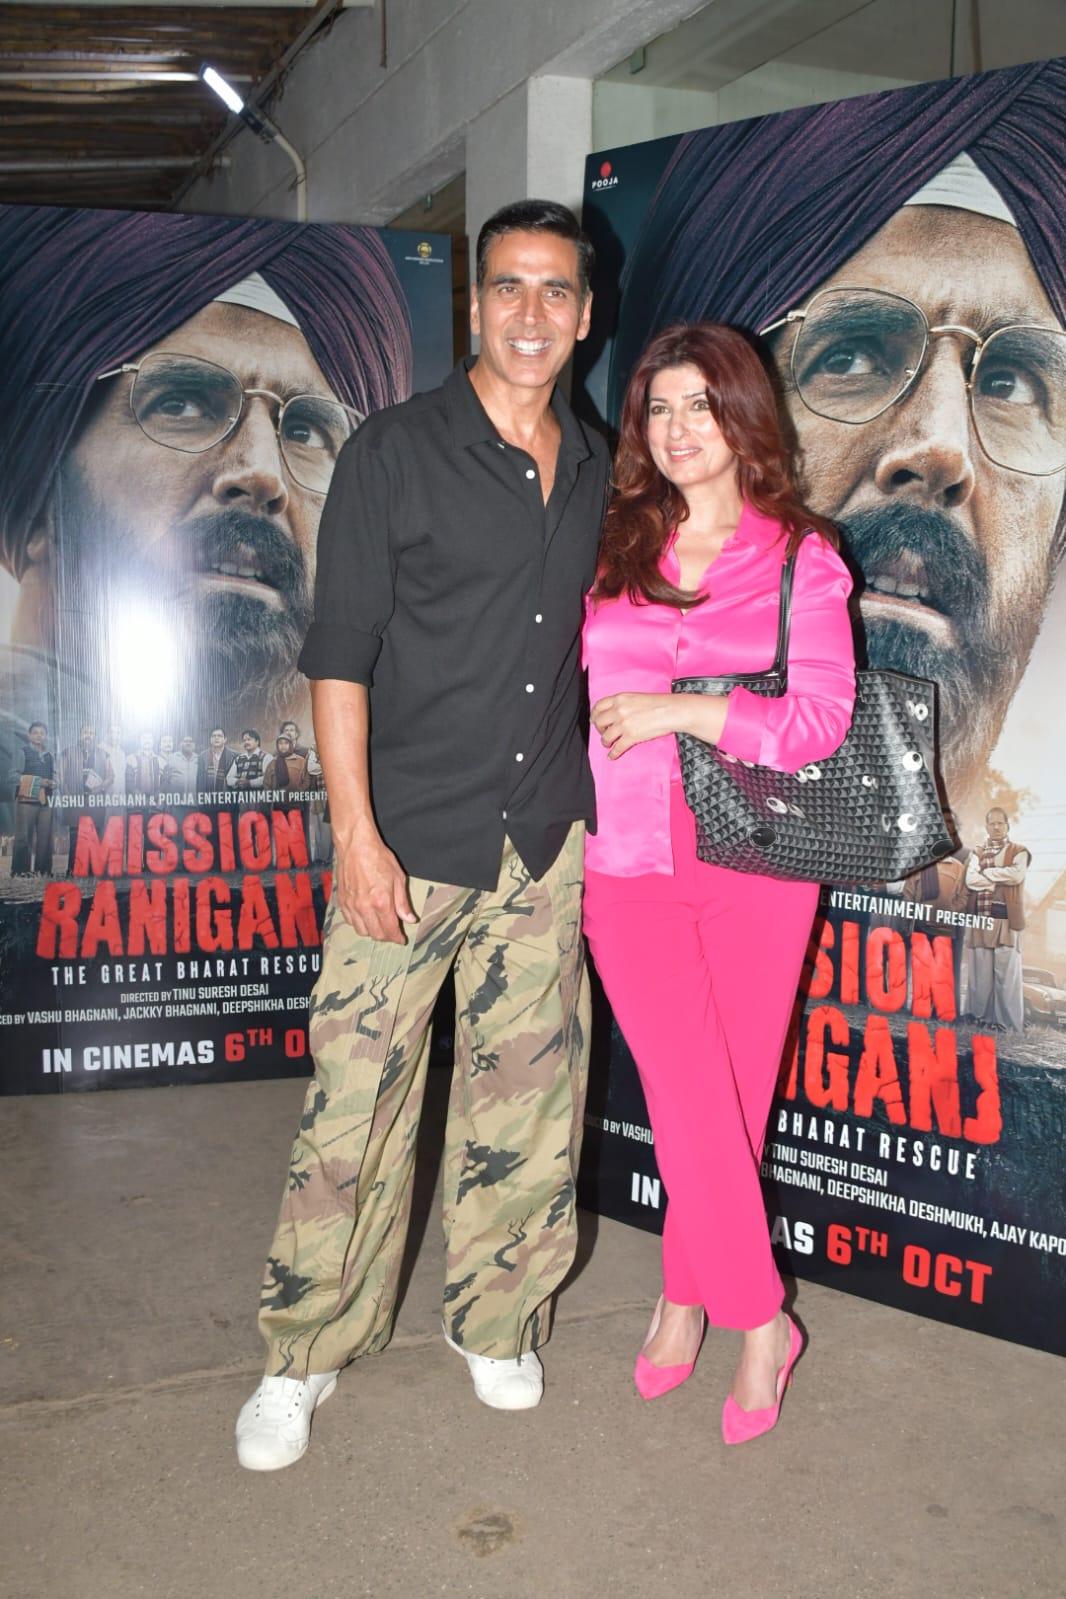 Akshay Kumar posed with his wife Twinkle Khanna as the two went to attend the celebrity screening of 'Mission Raniganj'